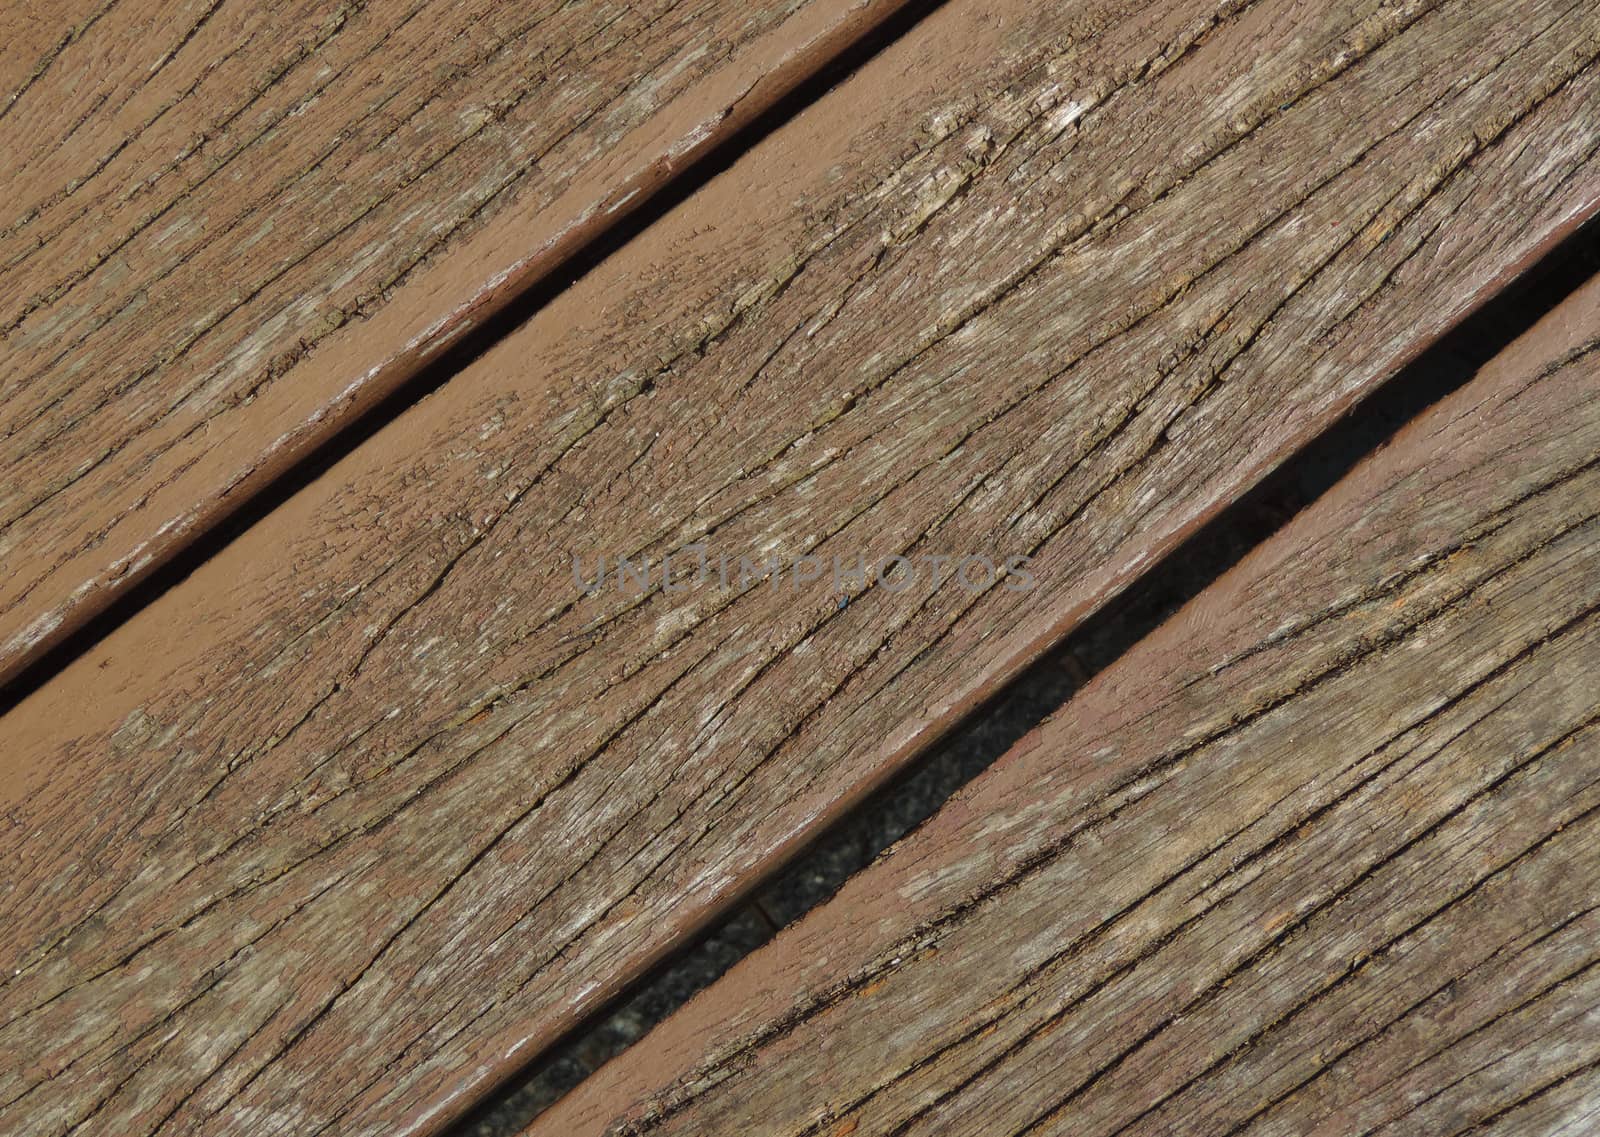 Surface texture of old wooden boards, background image